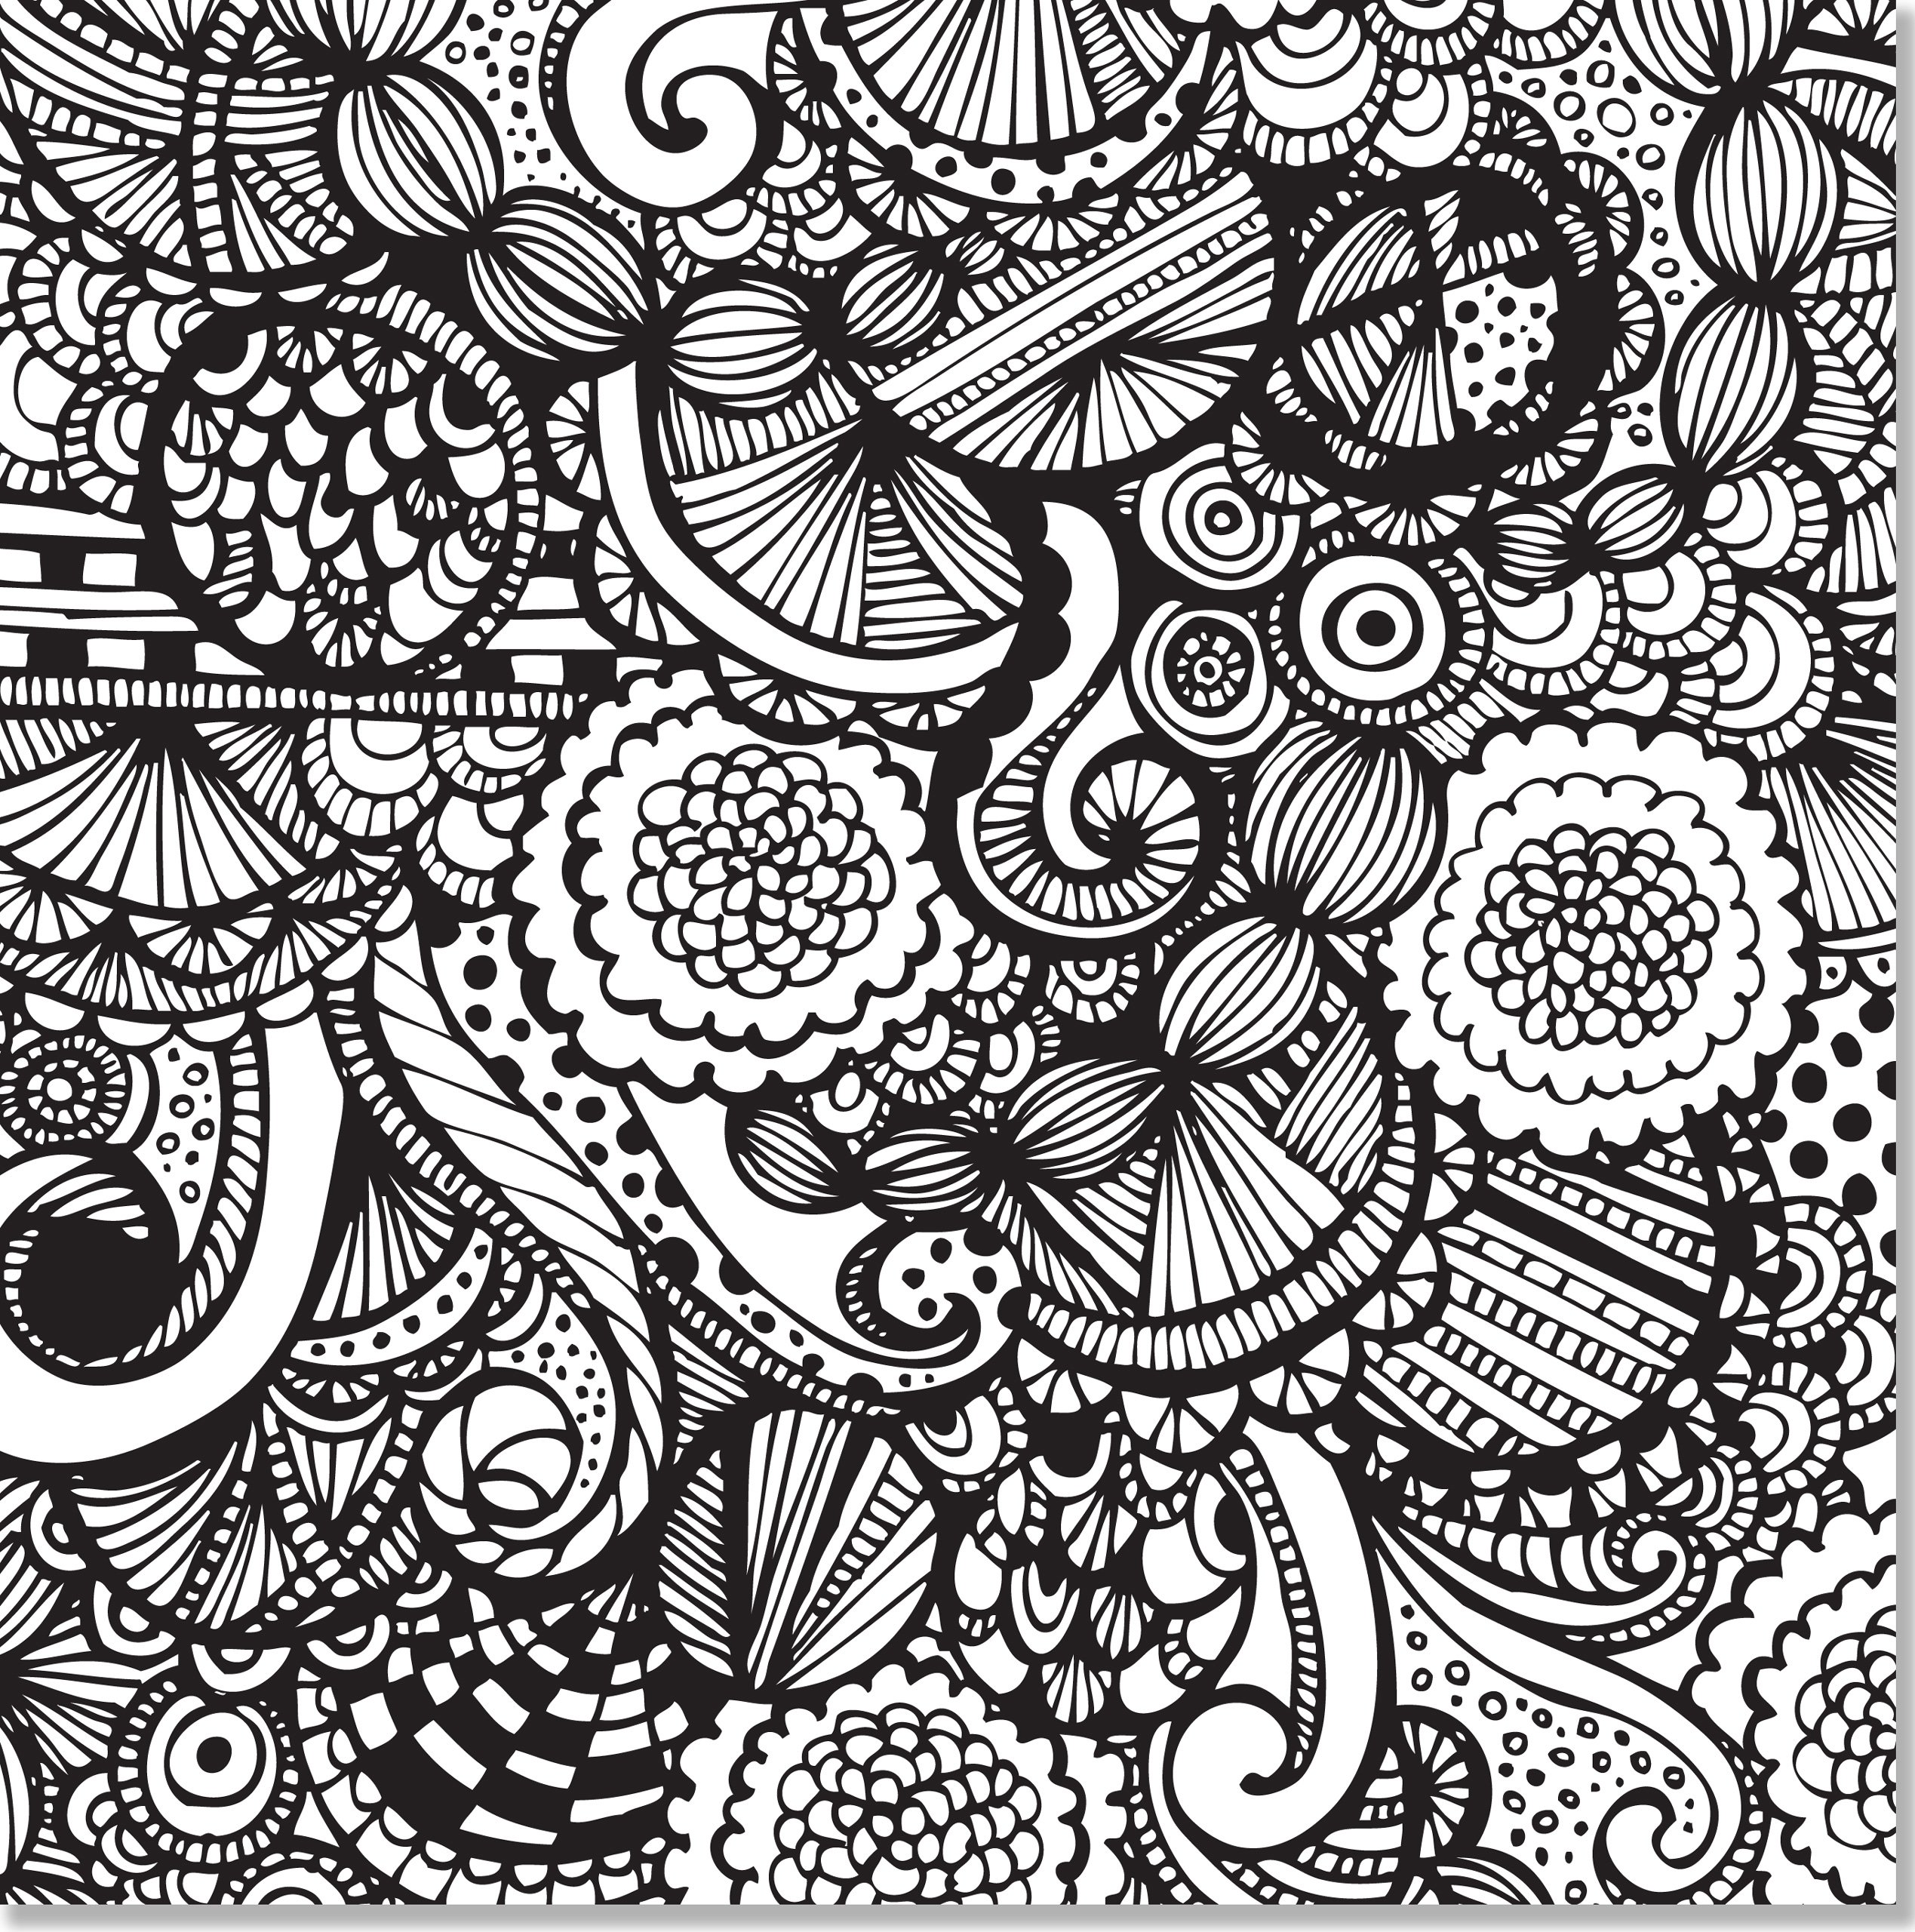 19+ printable stress management popular stress relief coloring pages for adults Coloring stress adult anxiety relief adults drawing relaxation books abstract mandala doodle template